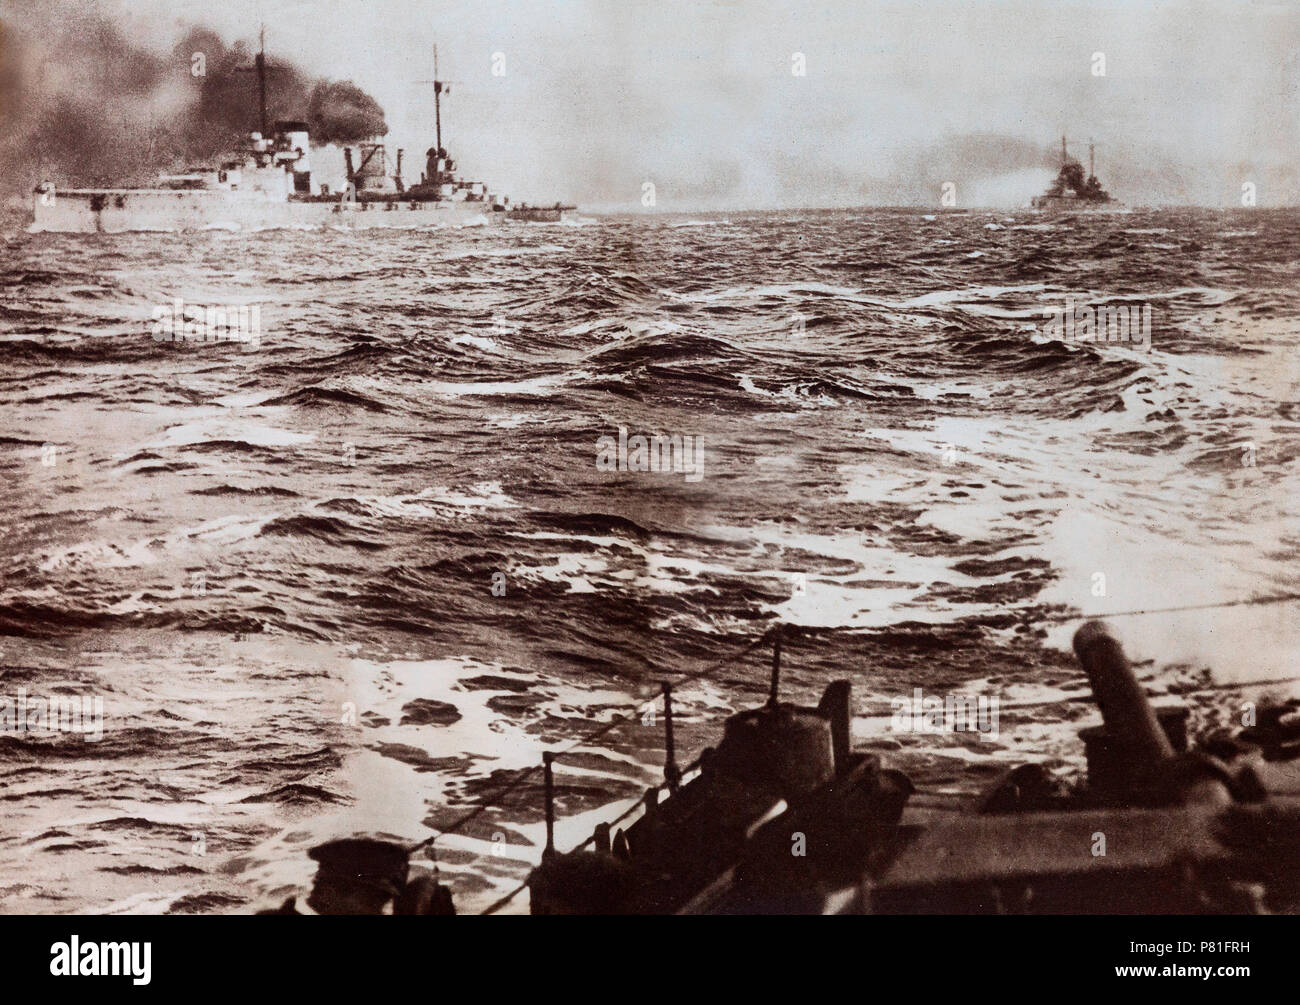 The main portion of the German Naval fleet surrendered and were taken to SCapa Flow in the Scottish Orkneys.  The High Seas Fleet was interned there under the terms of the Armistice whilst negotiations took place over the fate of the ships. Fearing that all of the ships would be seized and divided amongst the allied powers, the German commander, Admiral Ludwig von Reuter, decided to scuttle the fleet on 21 June 1919. Intervening British guard ships were able to beach a number of the ships, but 52 of the 74 interned vessels sank. Stock Photo